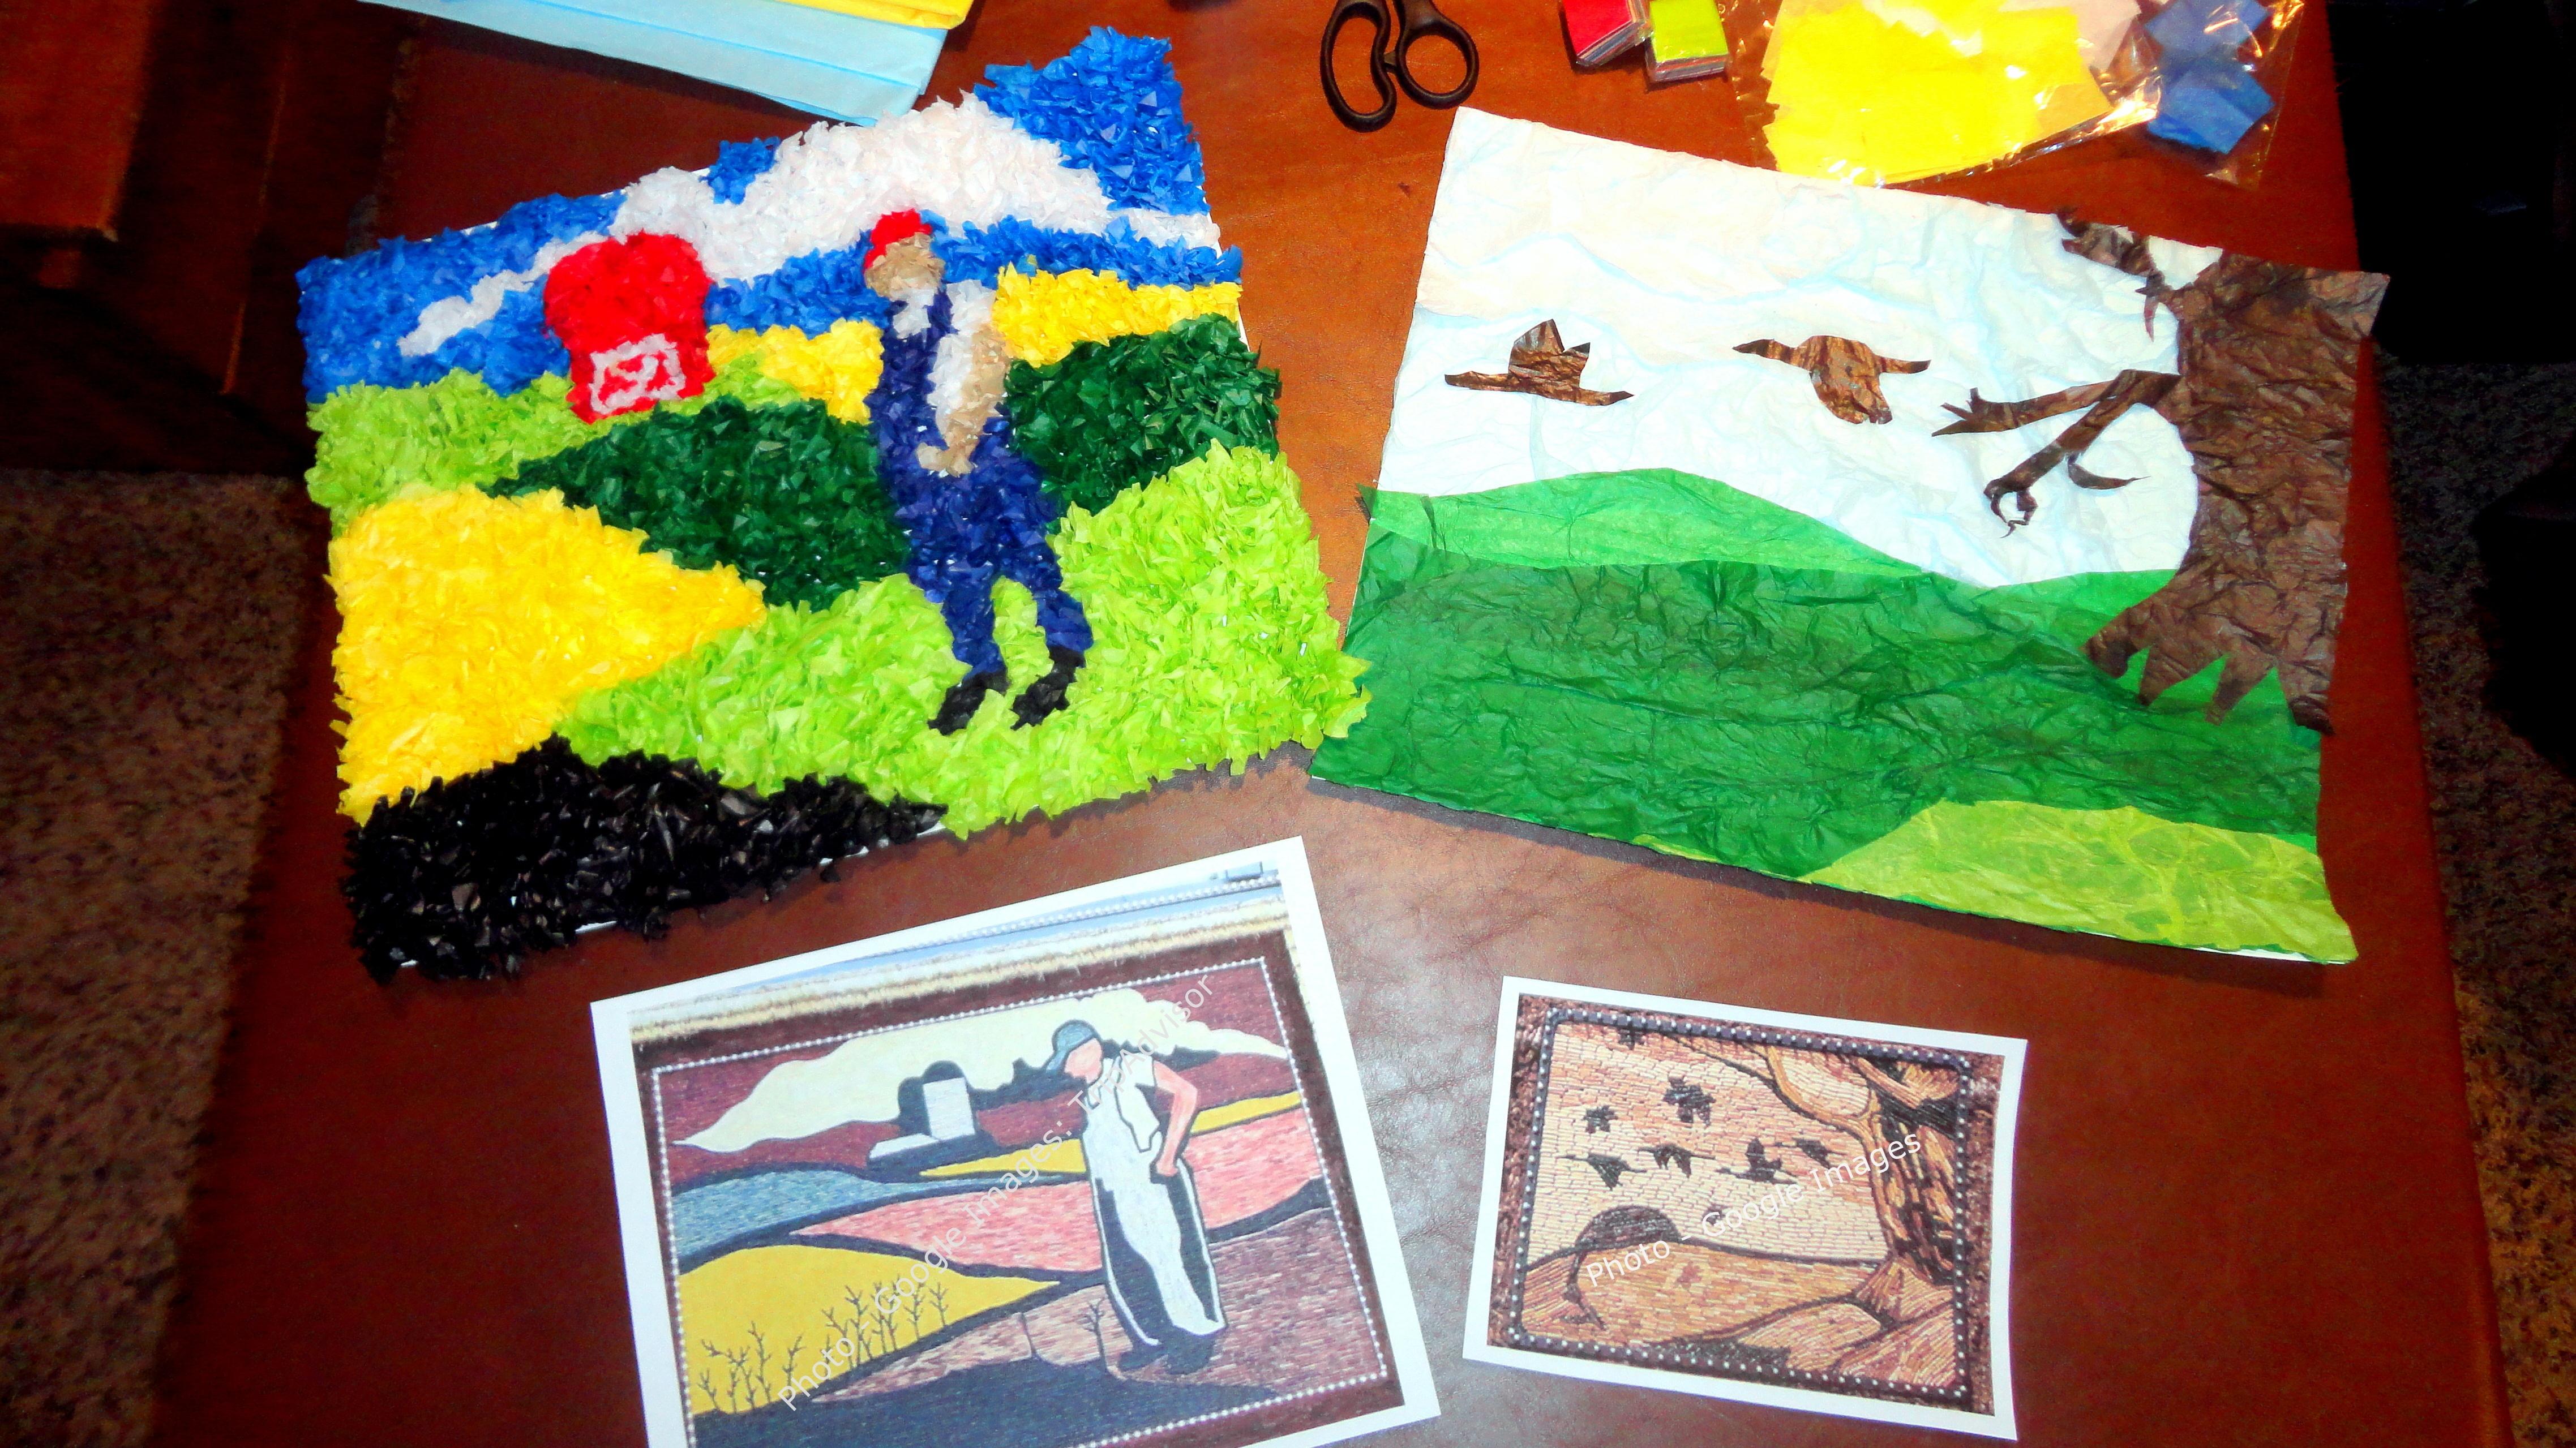 Decorative: Photo of artwork - photos of two original Corn Palace murals, one of a farmer and one of a bird scene. There are also two recreations made with tissue paper.  